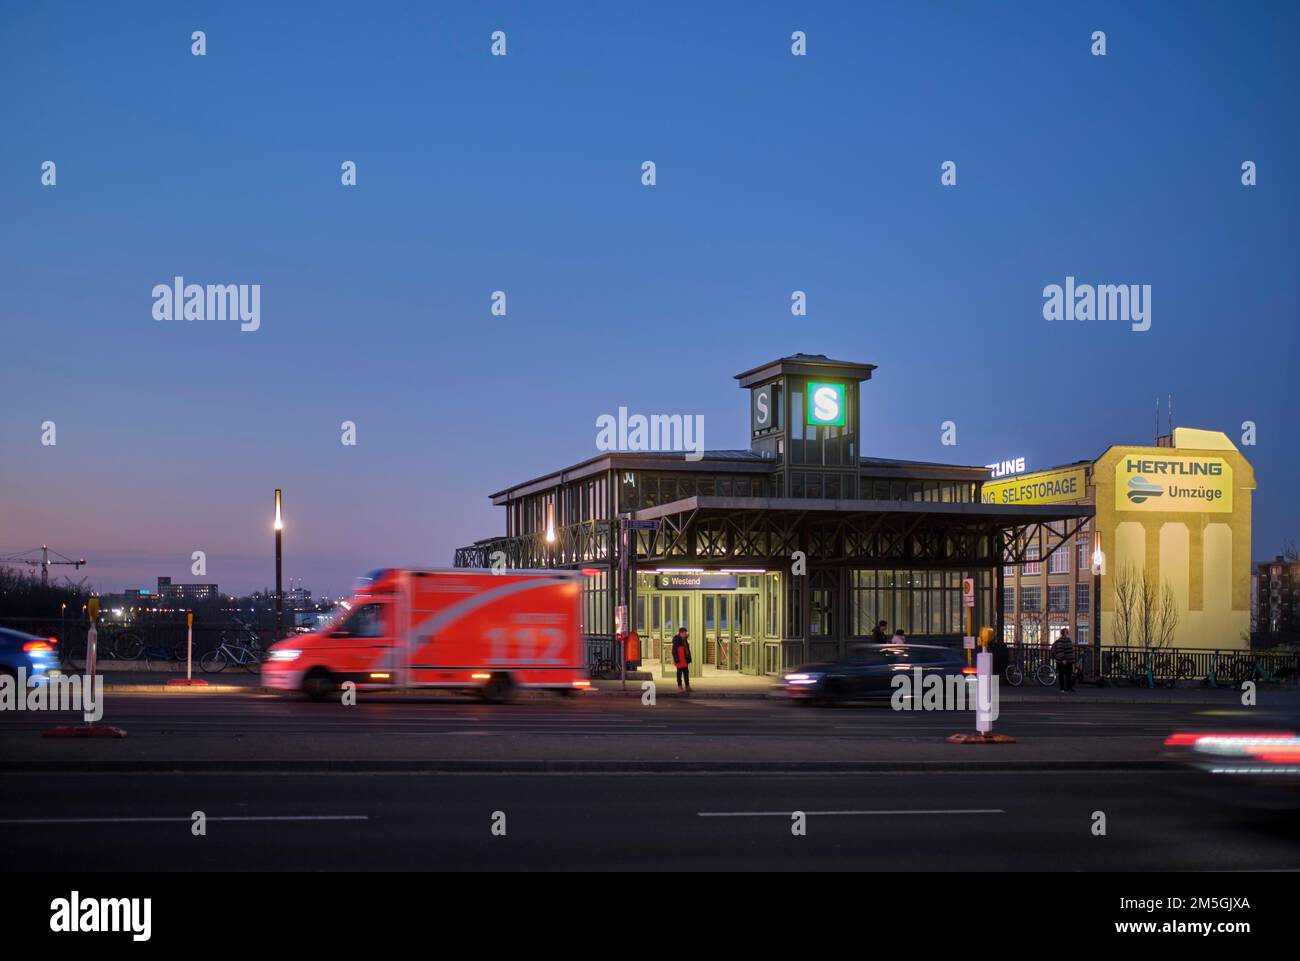 Hertling removals, fire brigade rescue vehicle, Germany, Berlin, 22. 03. 2022, S, Westend station, entrance building, industrial building Stock Photo